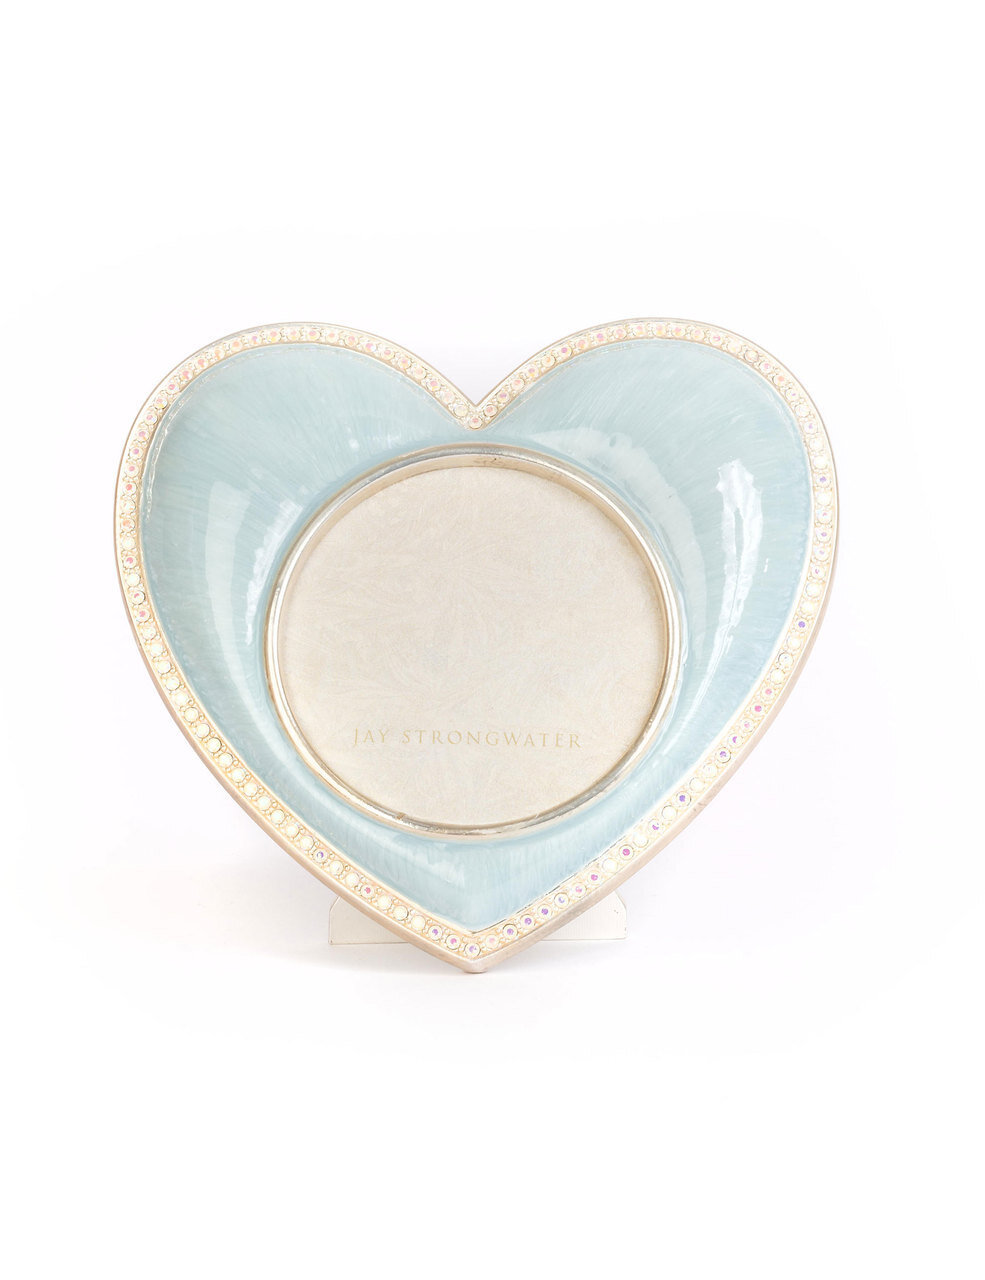 Jay Strongwater Chantal Heart Frame Pale Blue SPF5809-625